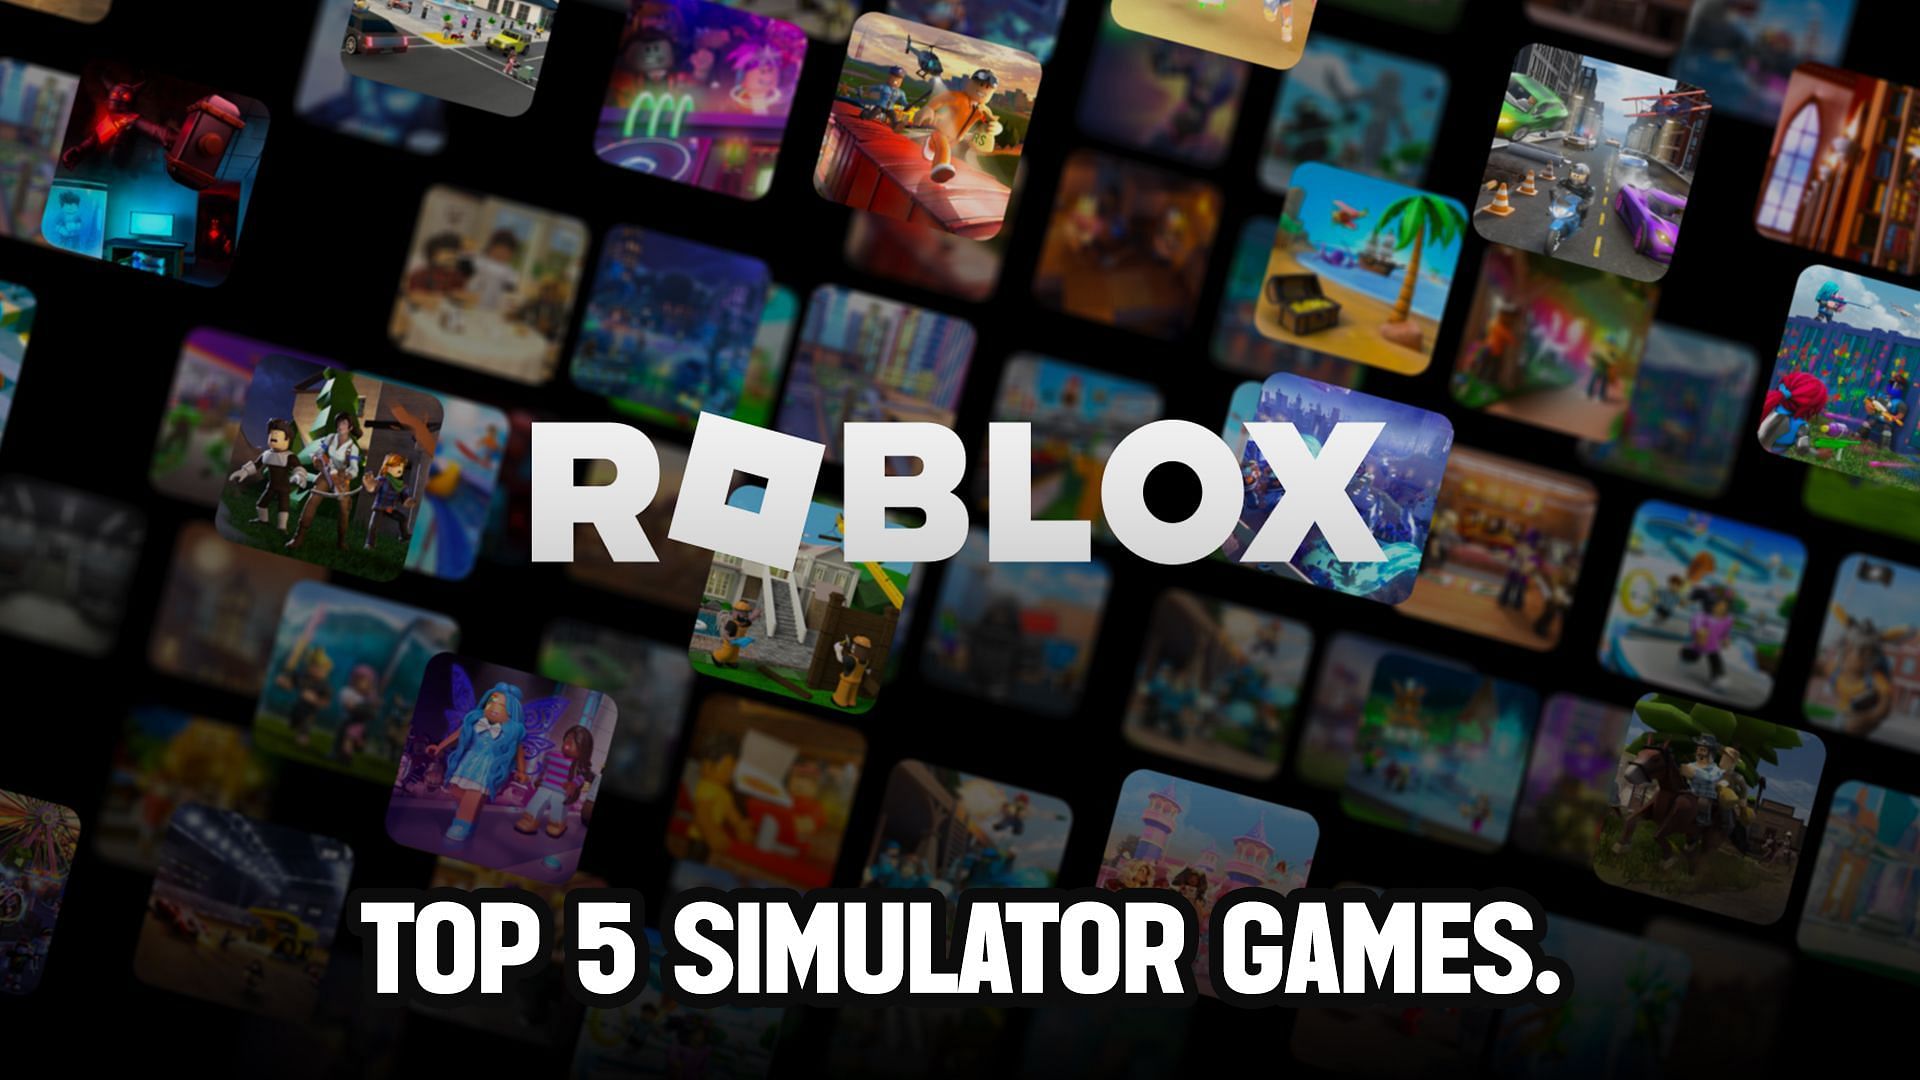 Best Factory Simulation Games, Ranked